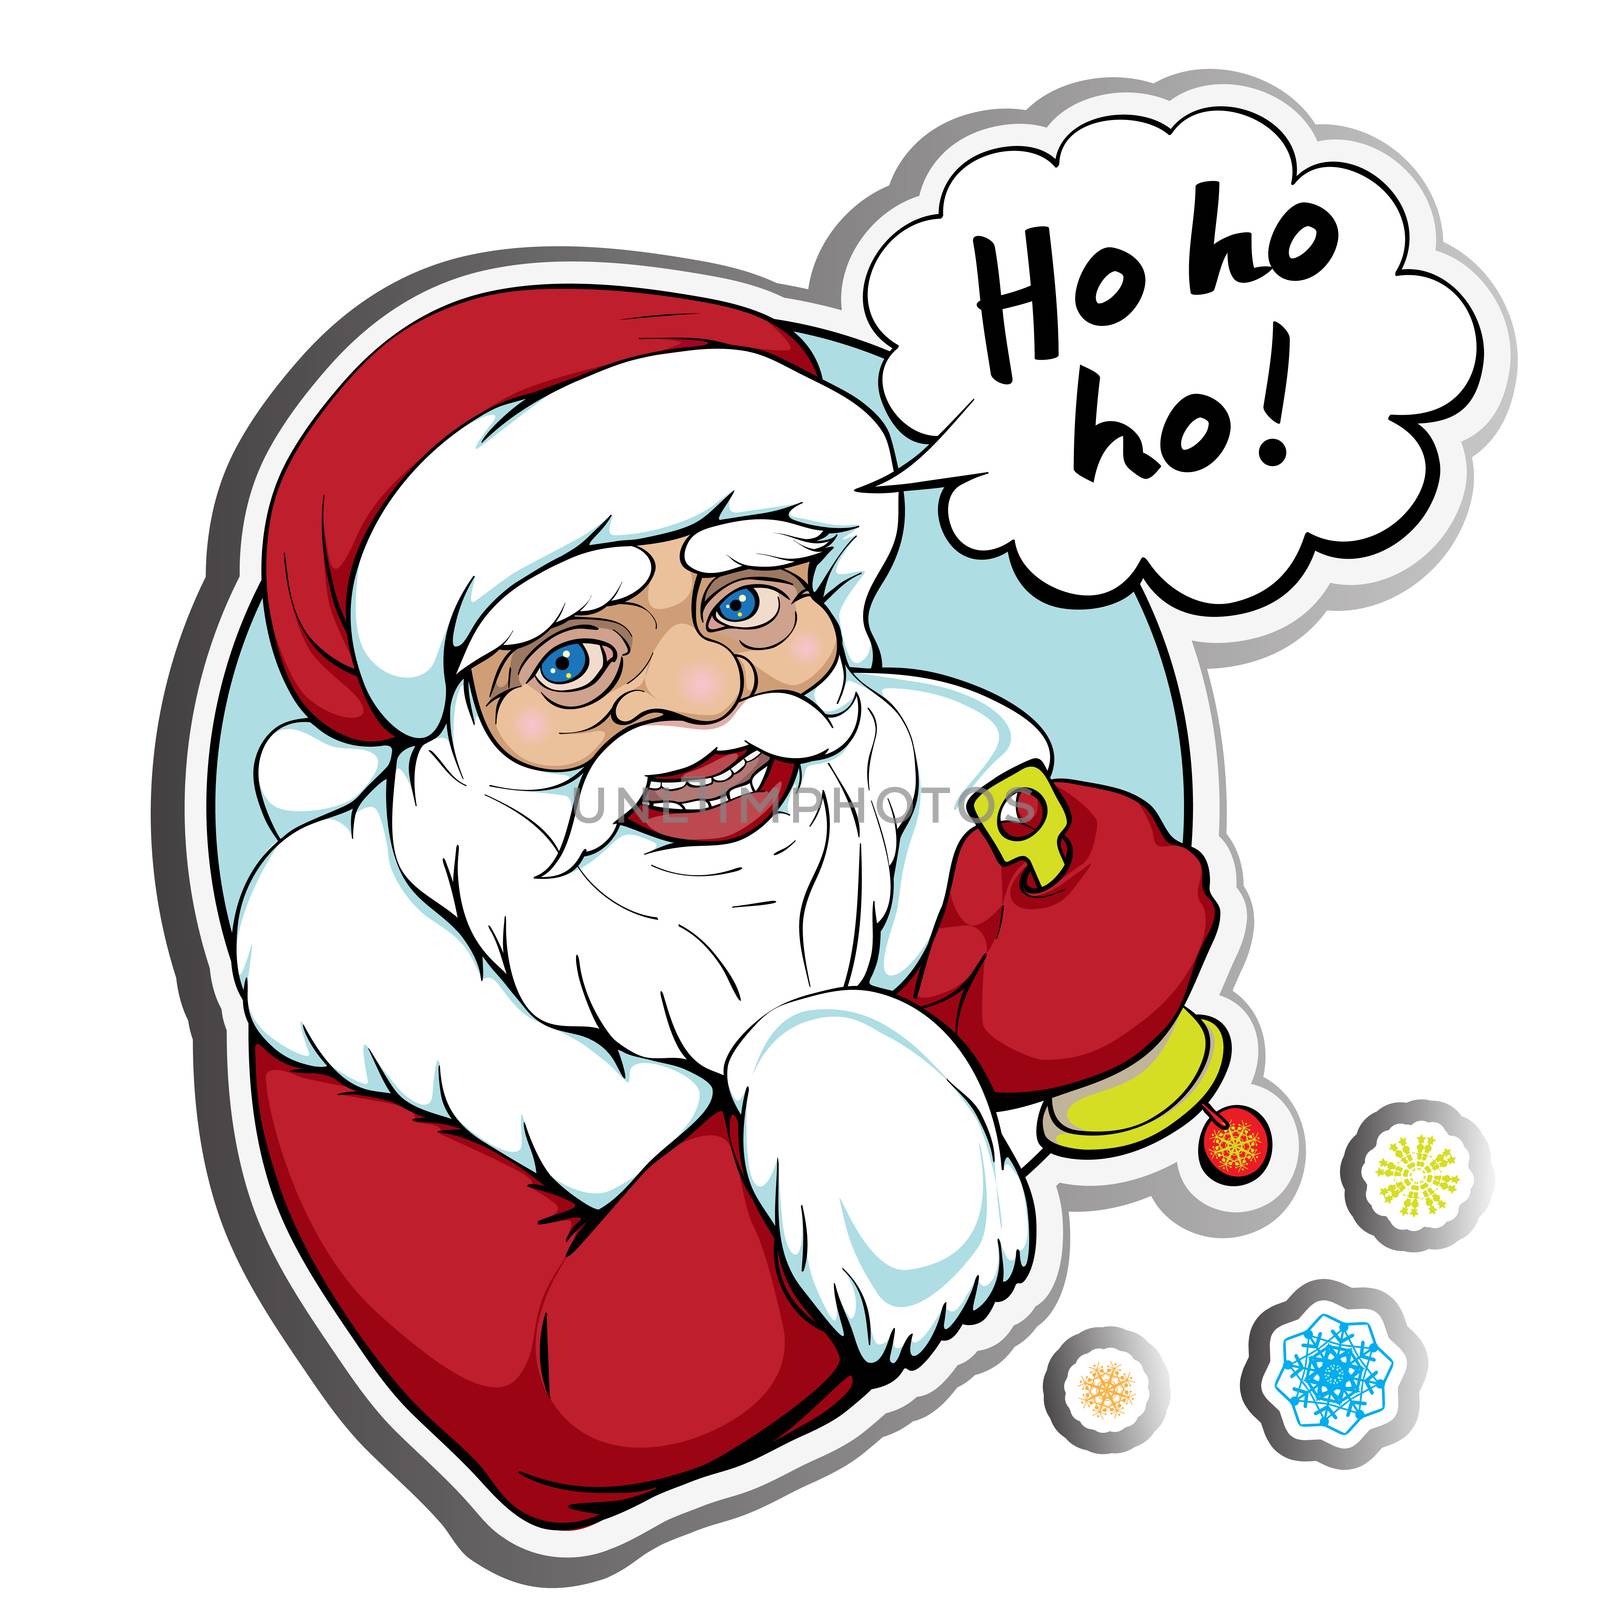 Santa Claus hand drawn illustration, sticker with speech bubble message for Christmas isolated on white